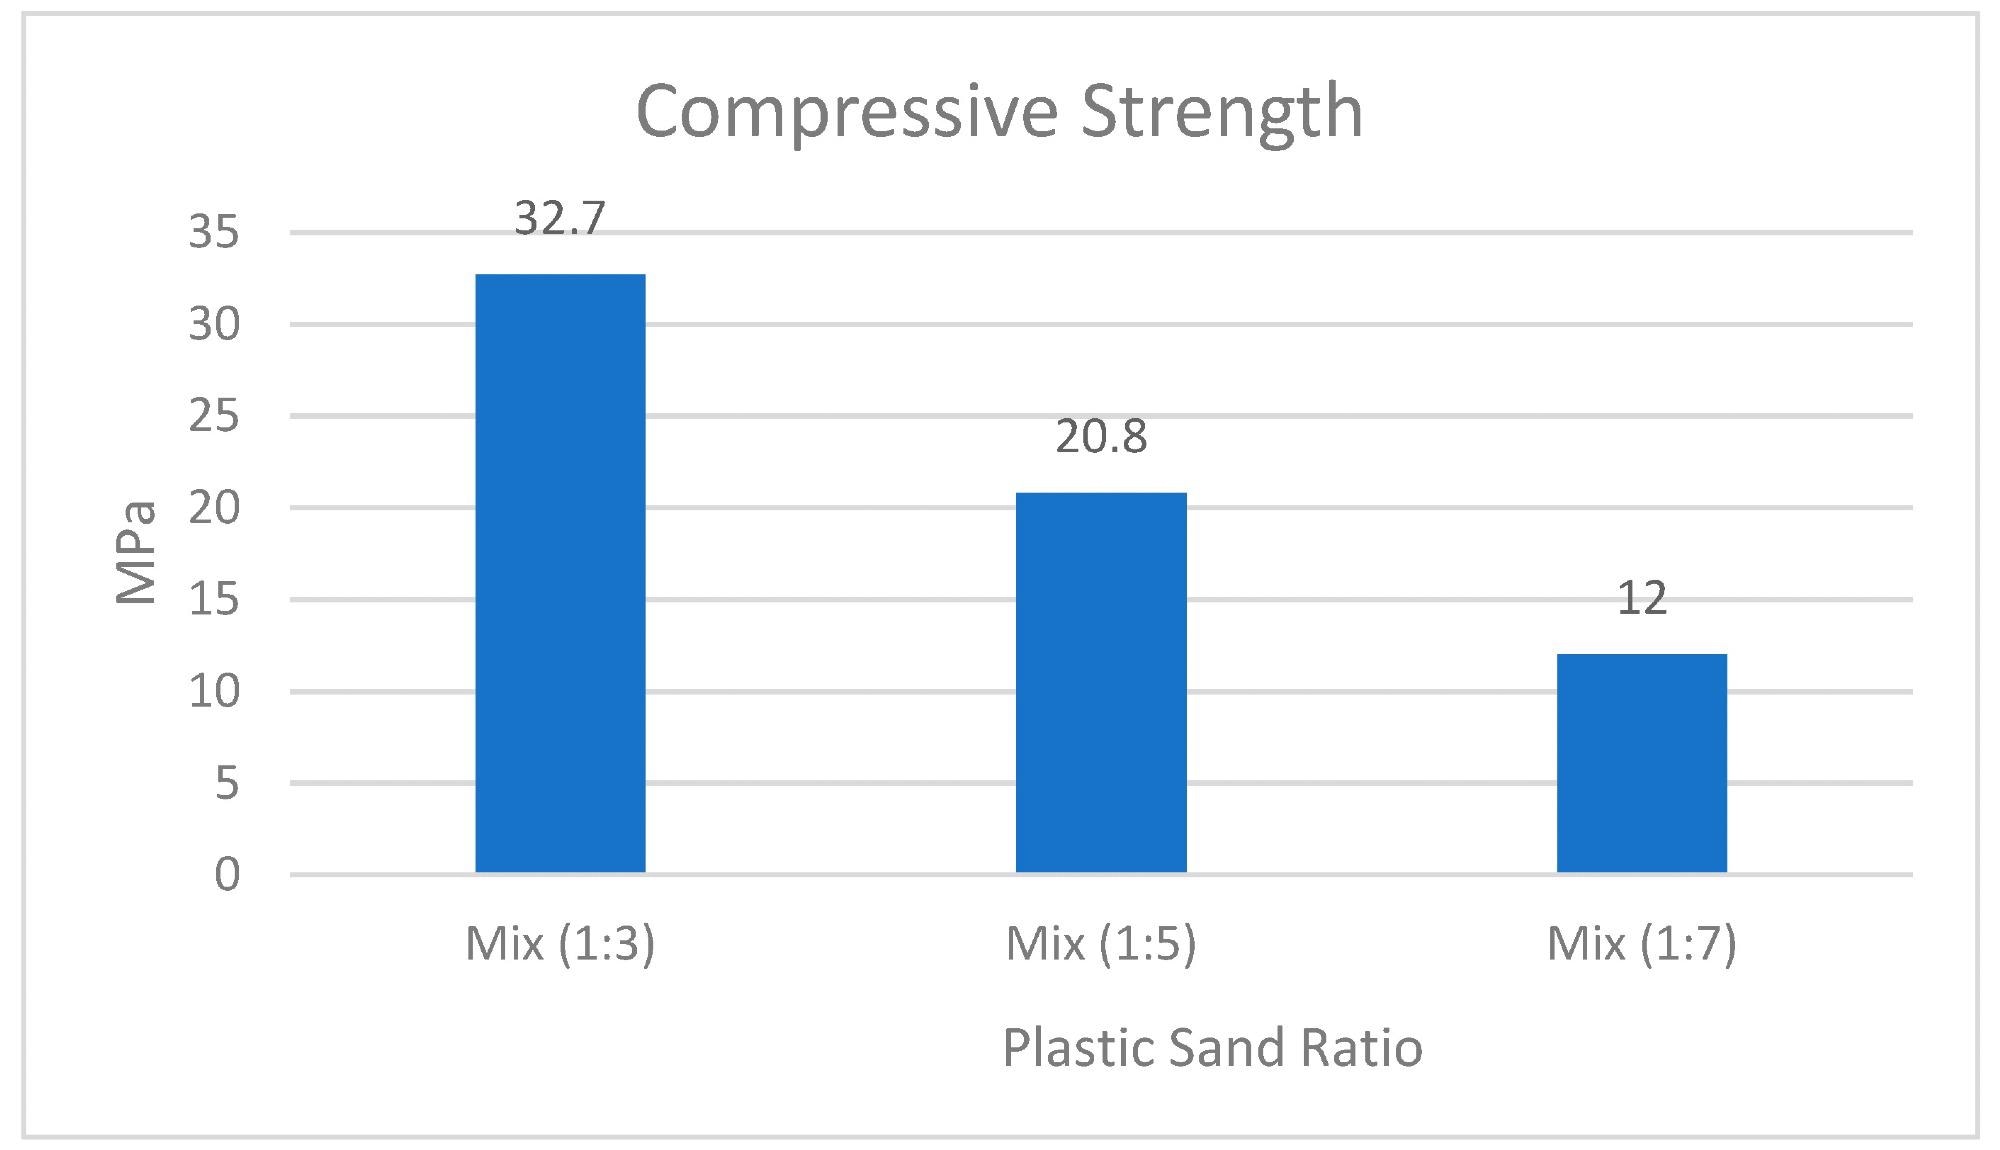 Compressive strength average of the specimen with plastic and sand mixture.